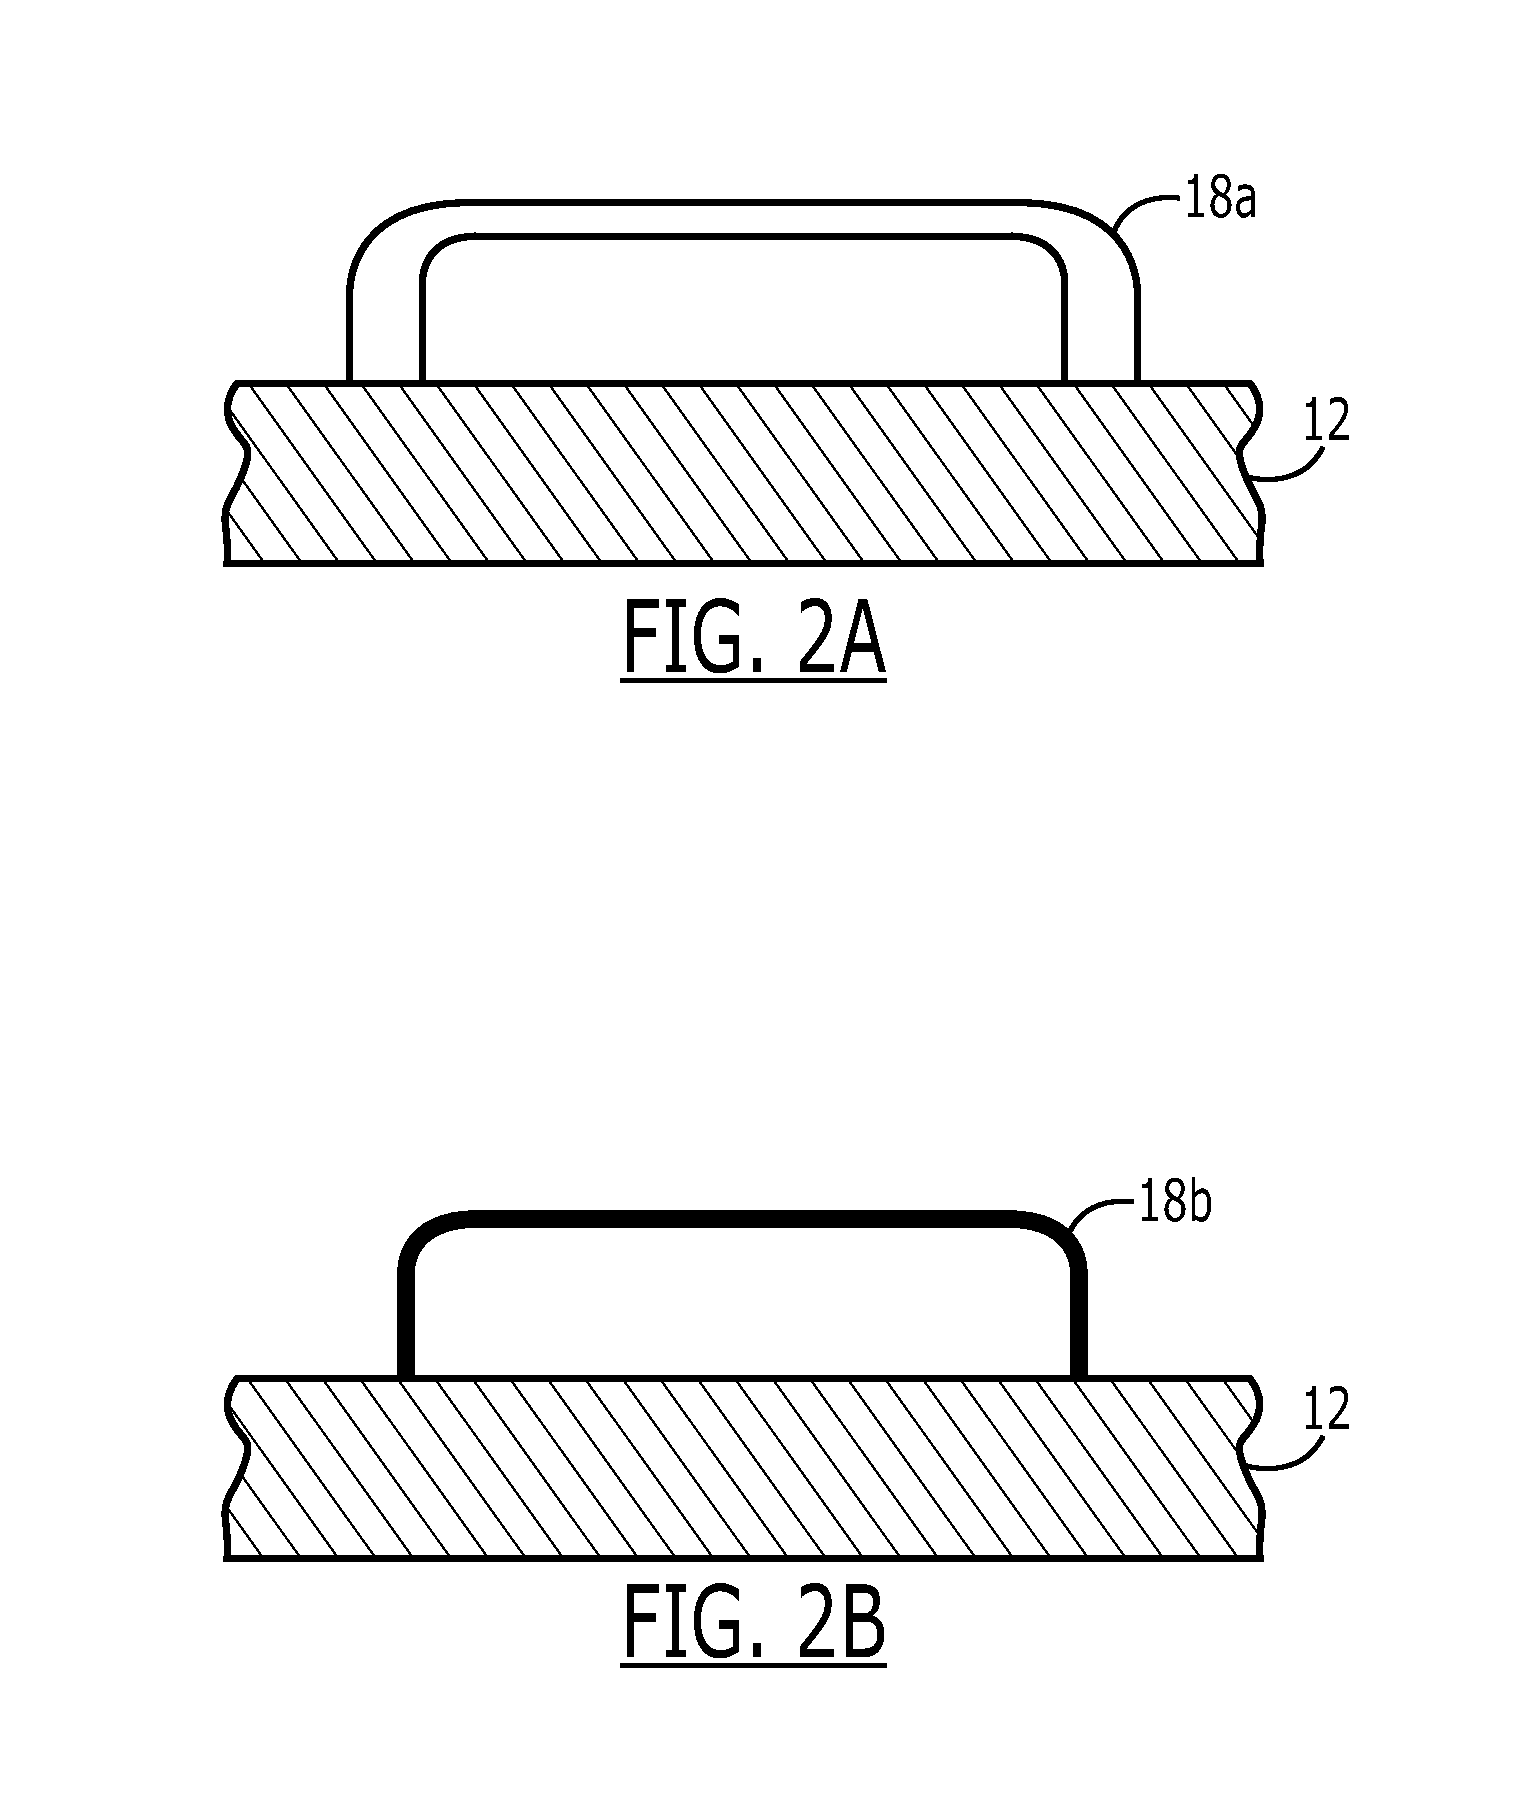 Integrally Molded Die And Bezel Structure For Fingerprint Sensors And The Like